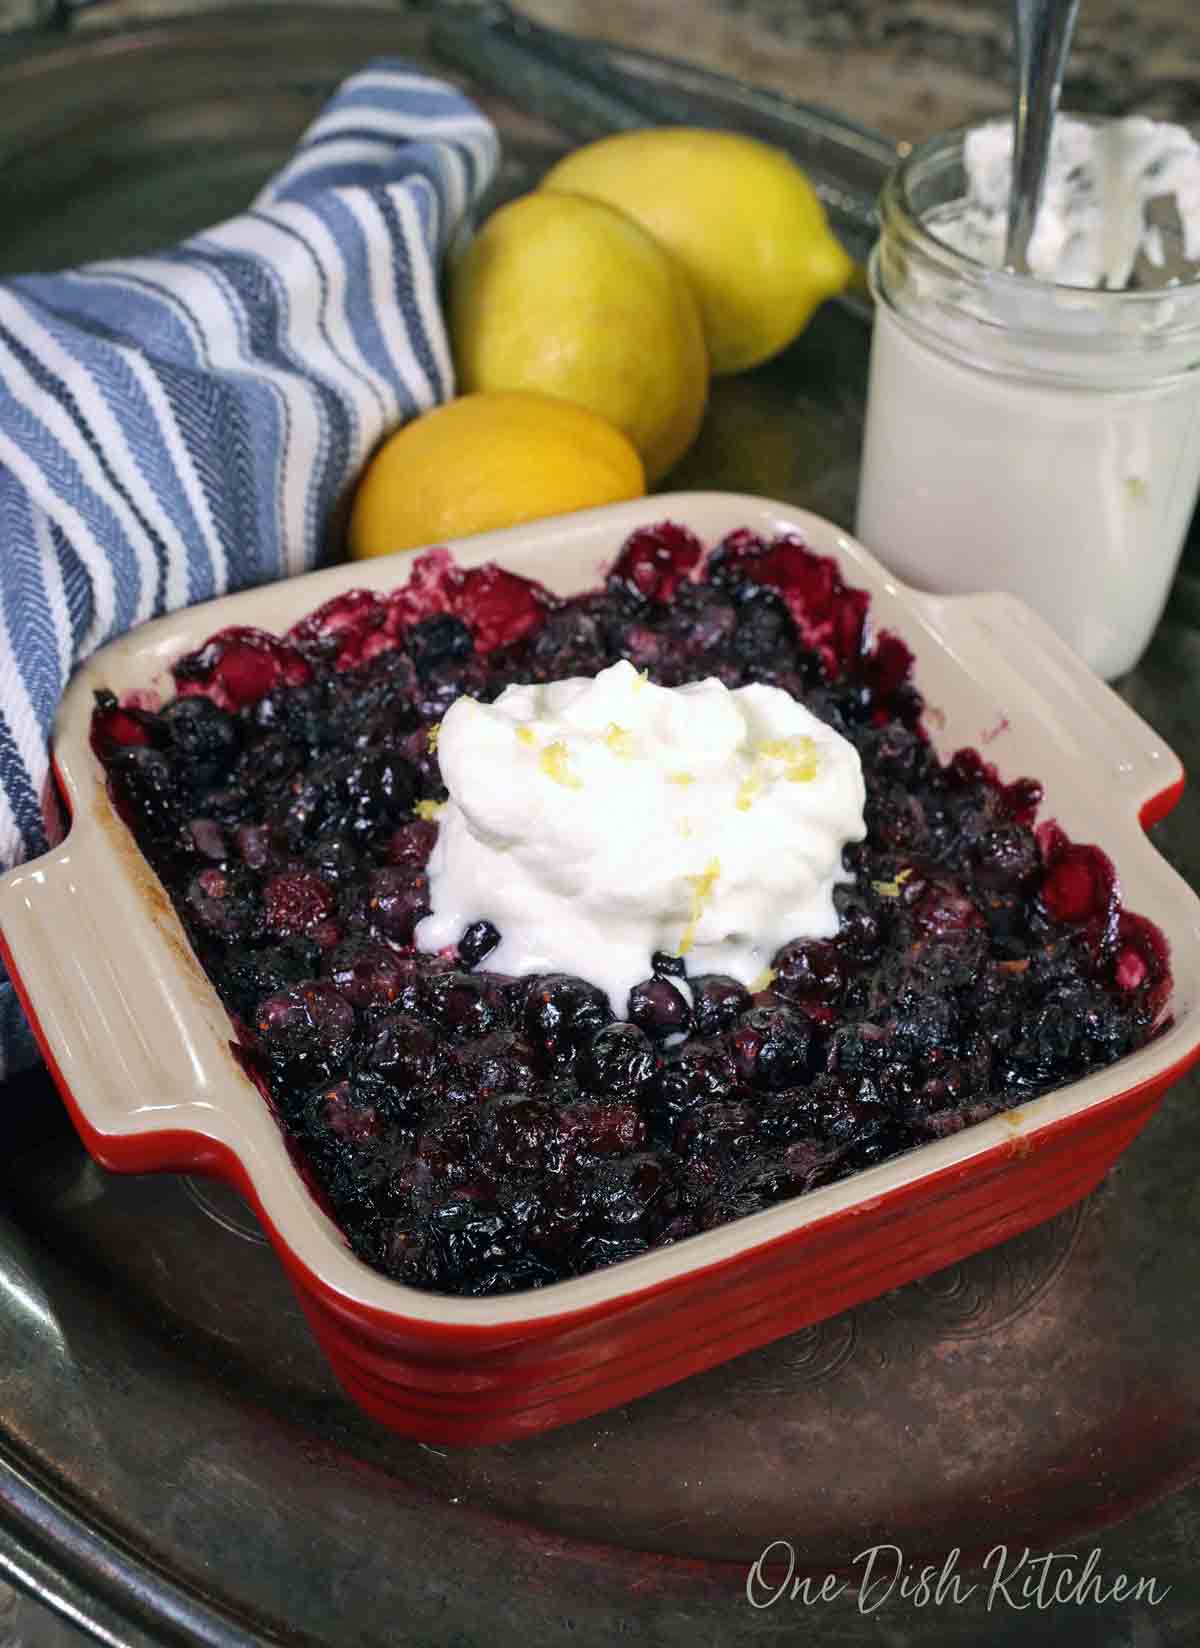 a blueberry pie baked in a square baking dish topped with whipped cream next to three lemons and a blue napkin.